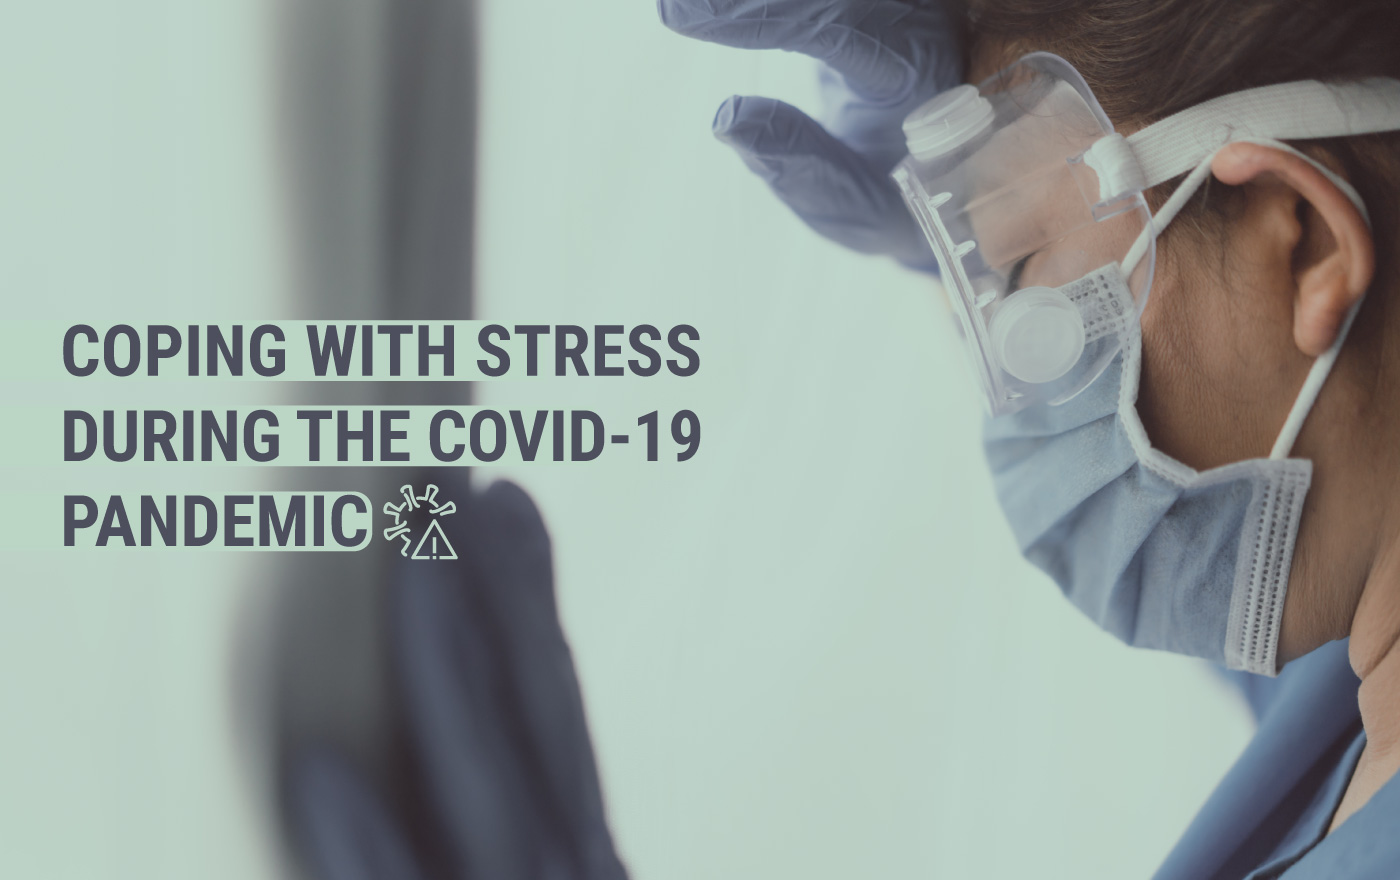 Coping with Stress during the COVID-19 Pandemic:  Suggestions for Rad Techs